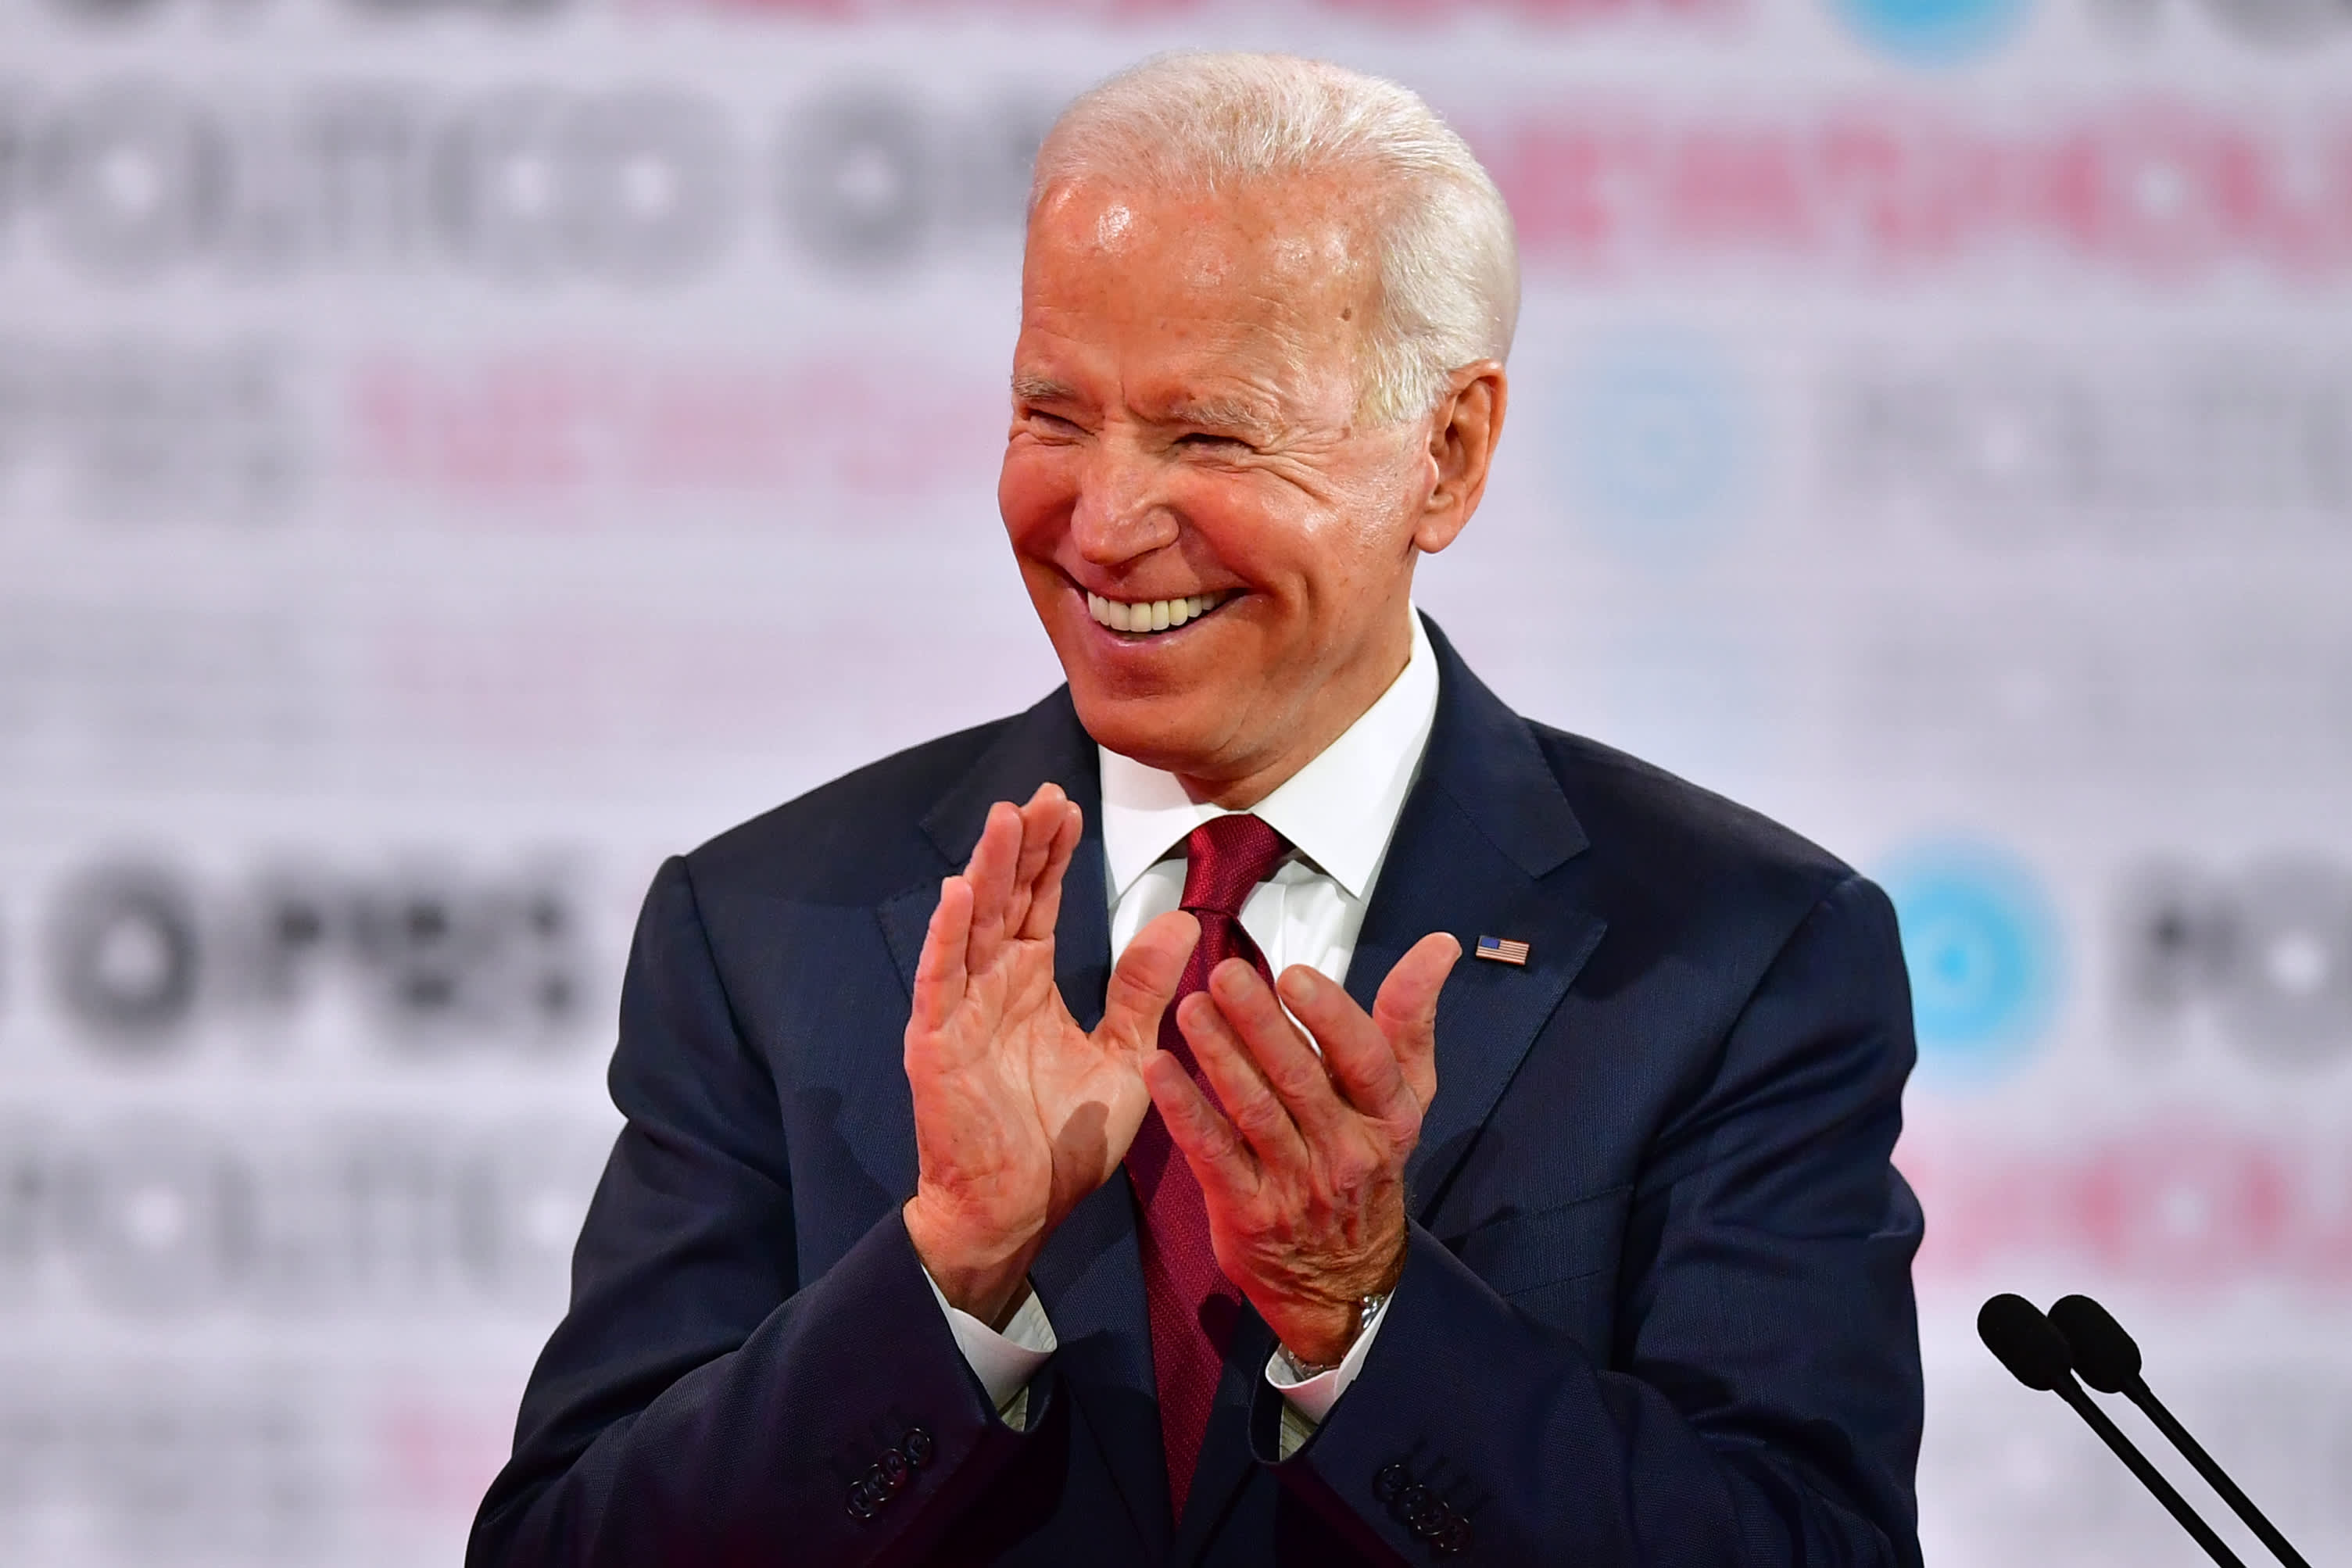 Joe Biden urged to attract small donors after raising $46 million in March